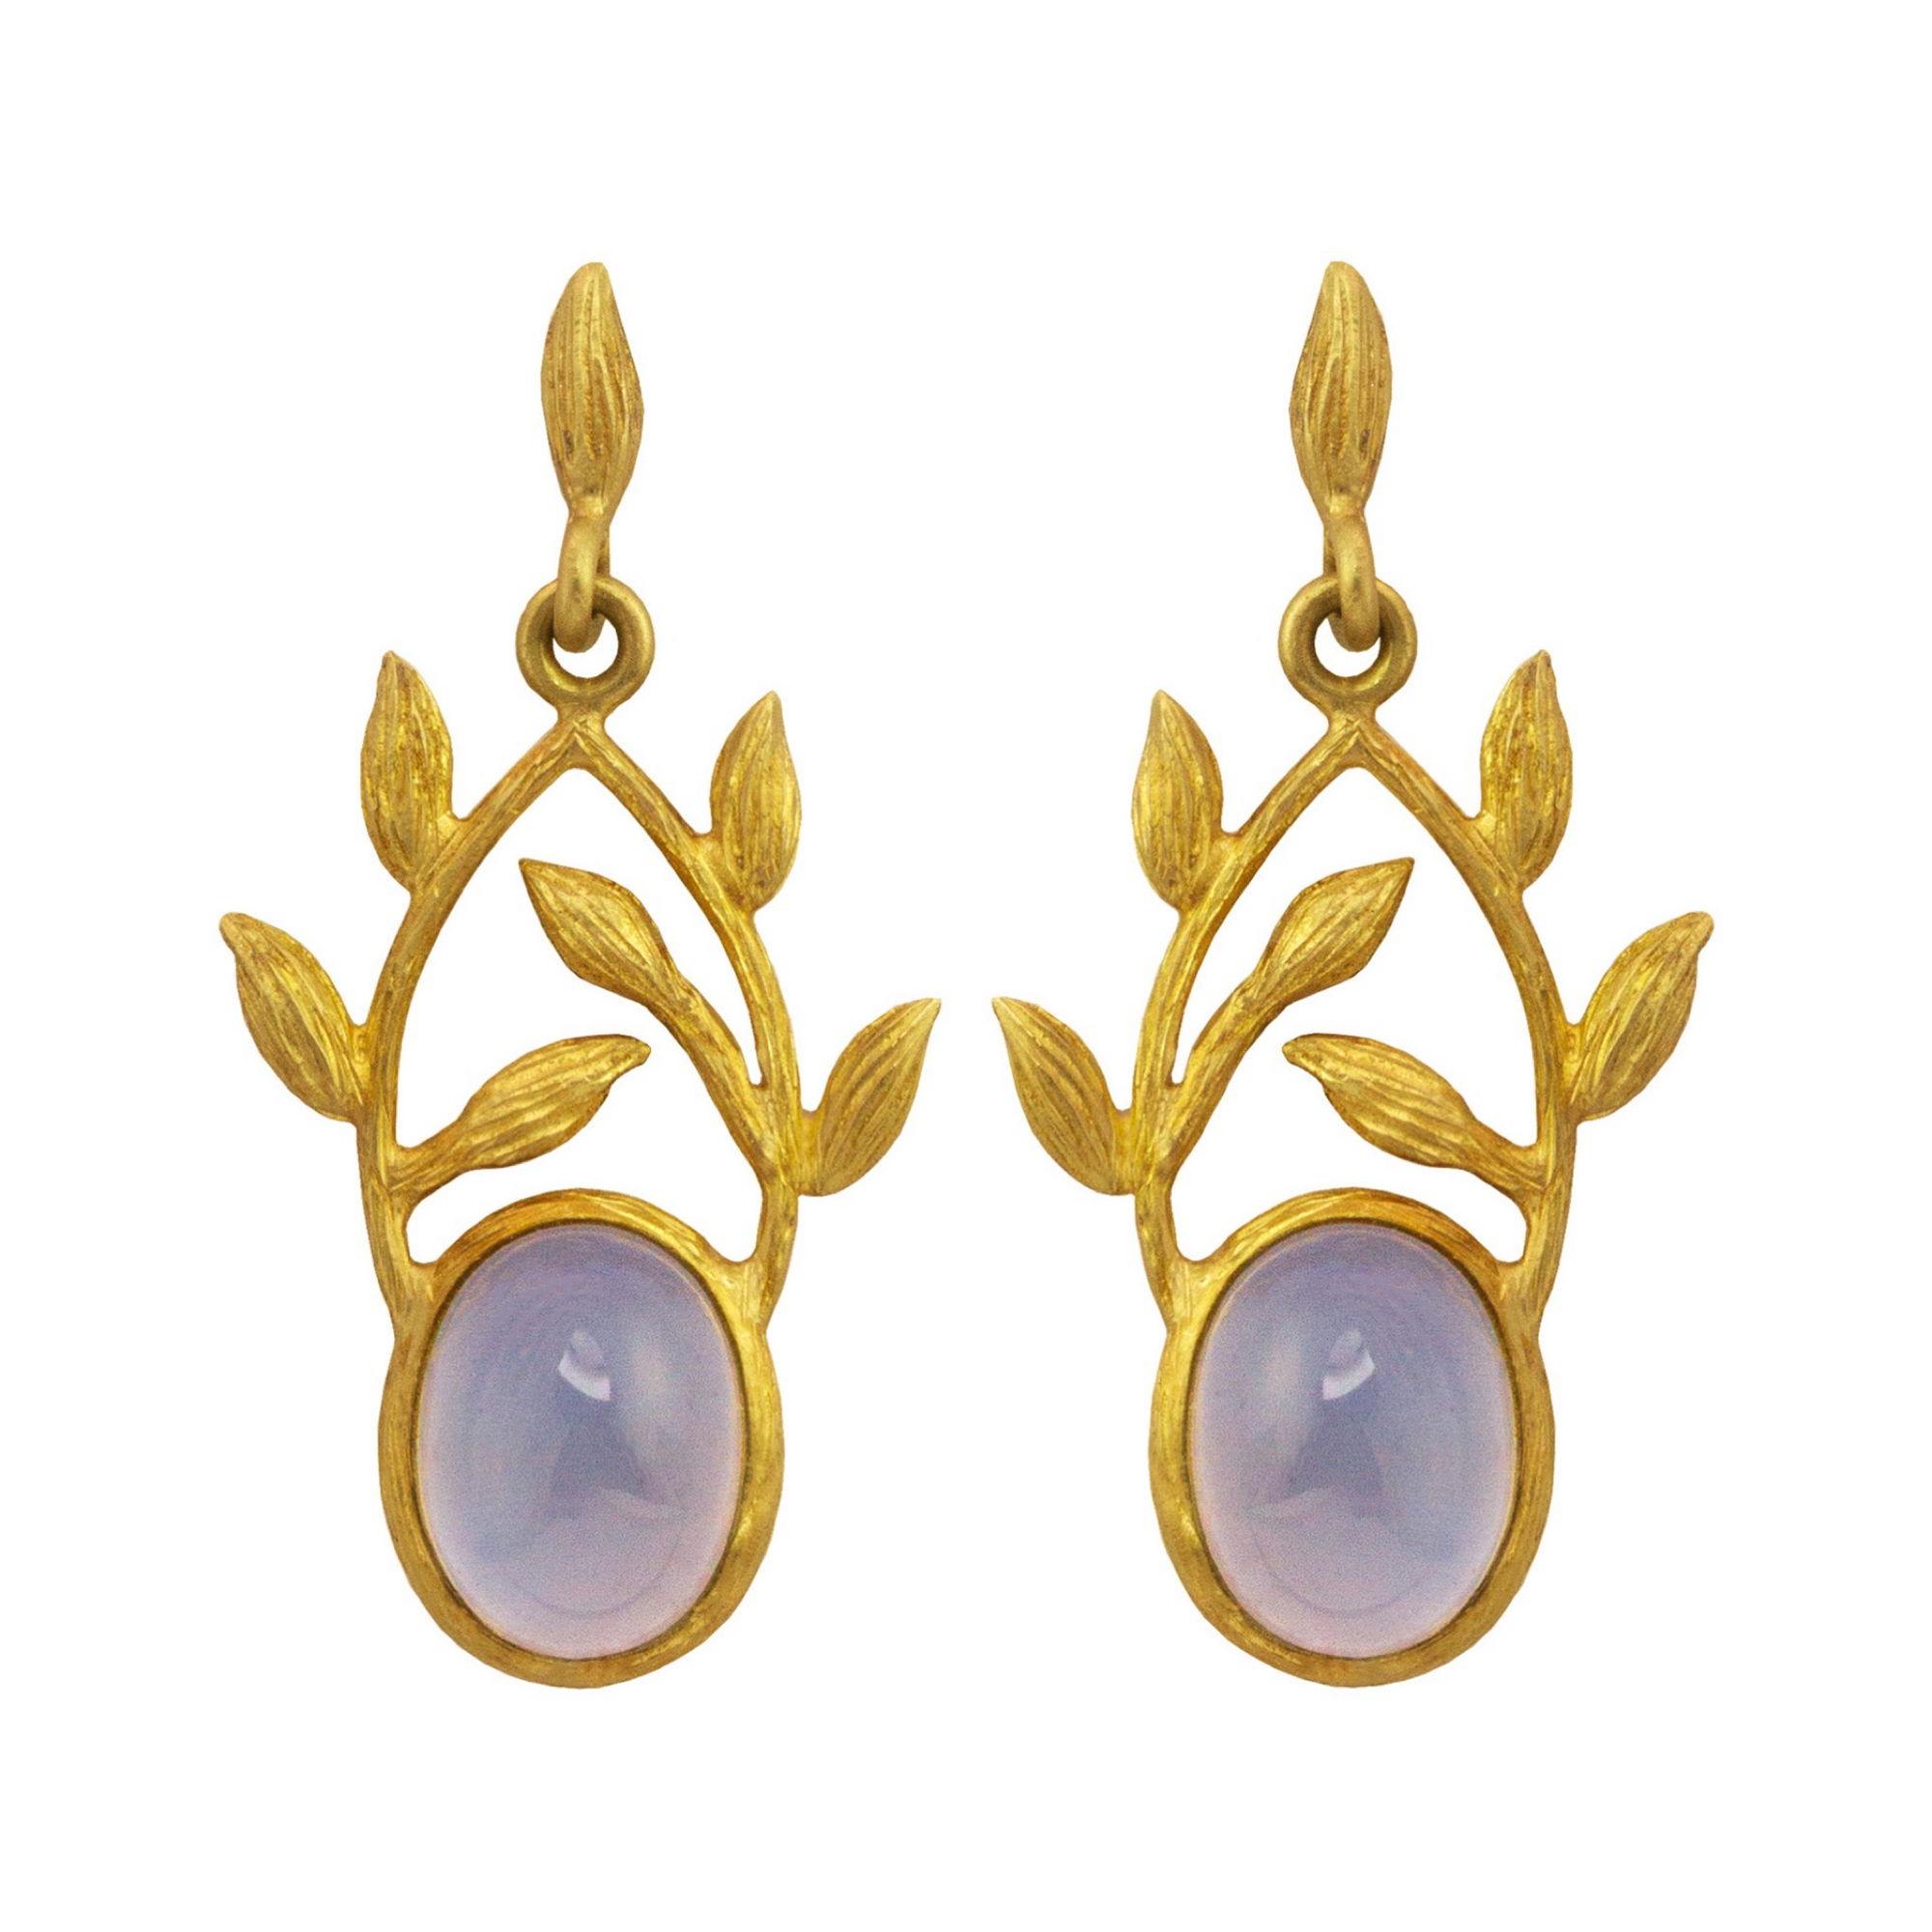 Chalcedony Leaf Crown Earrings by Laurie Kaiser available at Talisman Collection Fine Jewelers in El Dorado Hills, CA and online. The earrings feature lavender chalcedony cabochon ovals that dangle gracefully from 18k yellow gold vines. These lovey earrings secure with a comfortable post back closure. 